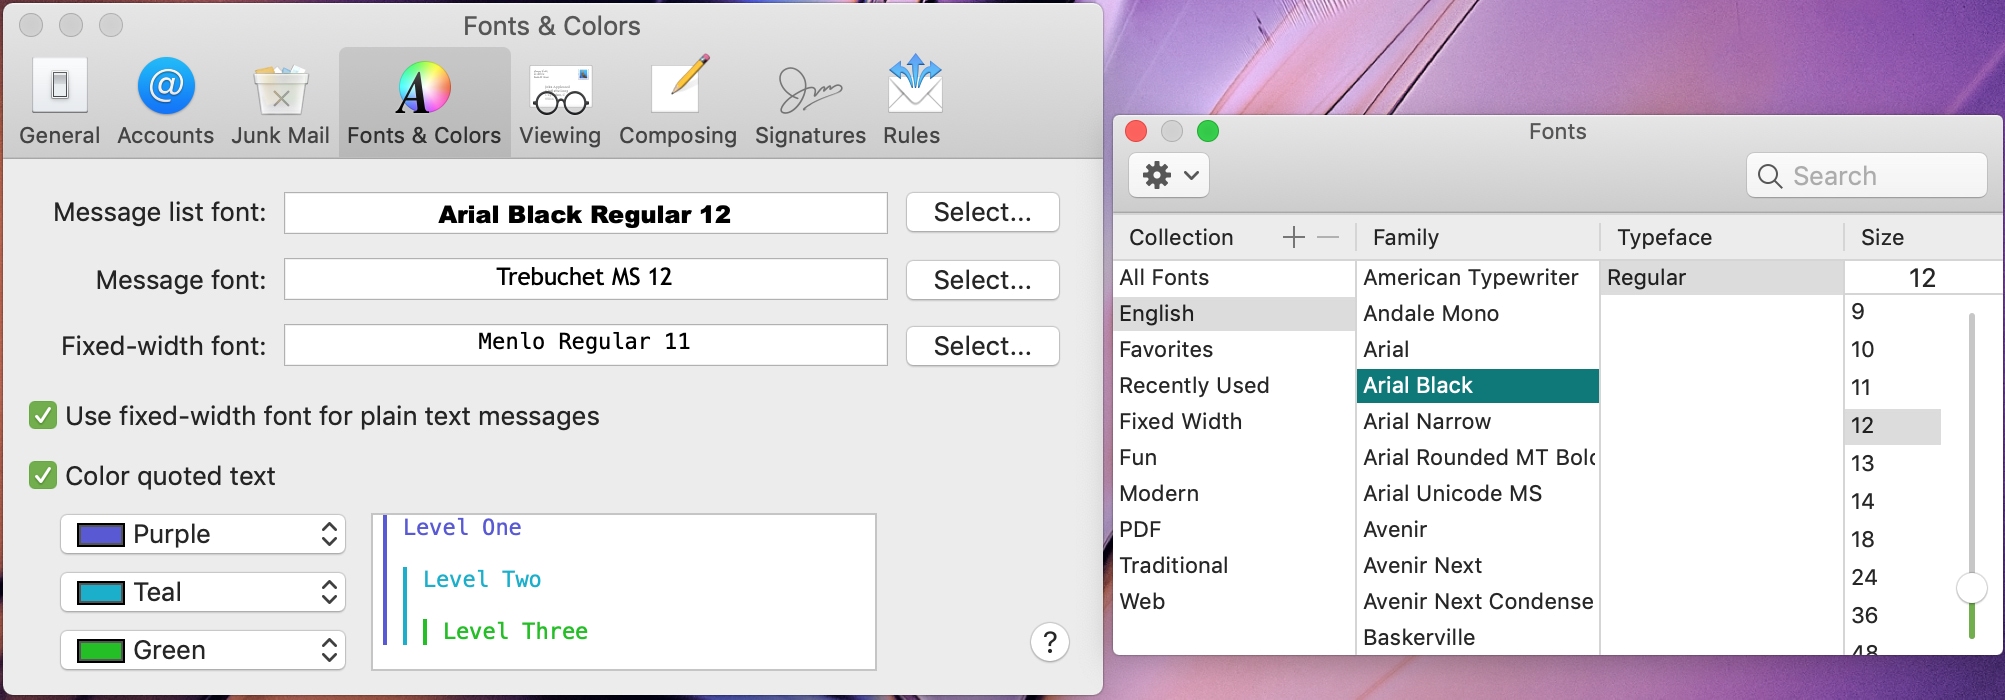 How To Customize Fonts And Colors In The Mail App On Mac